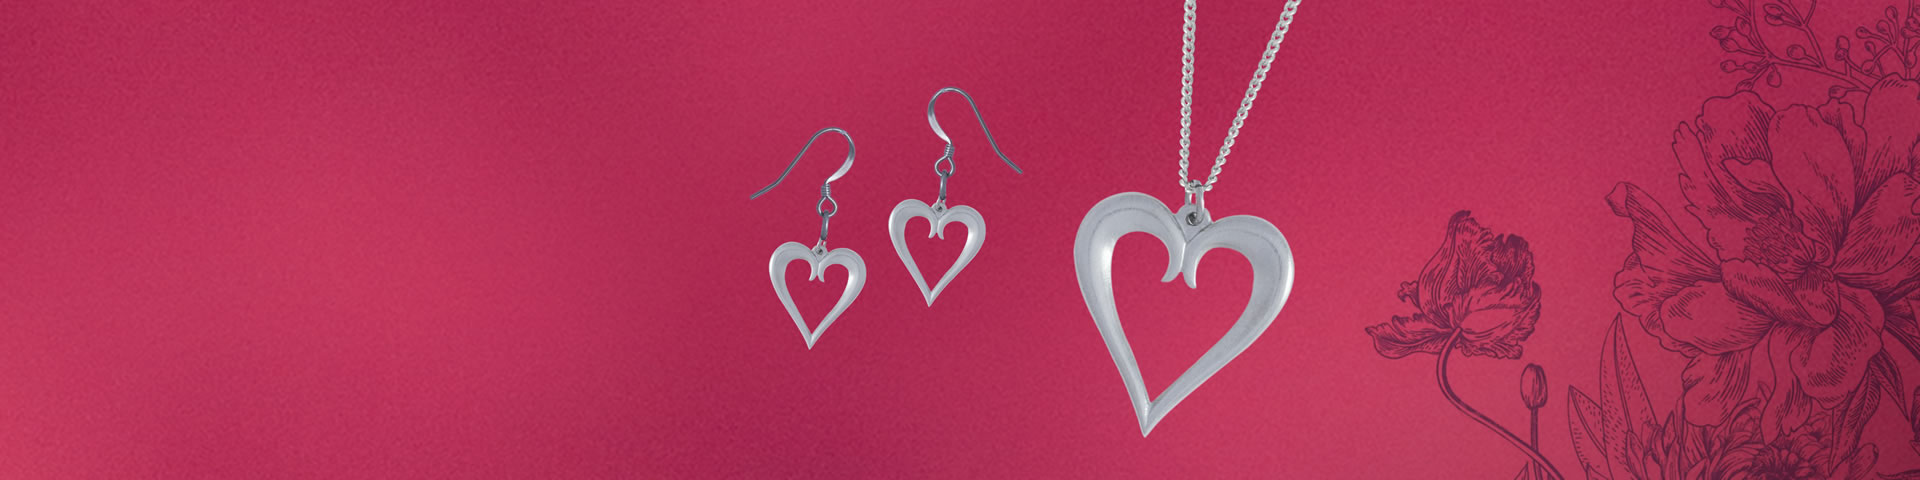 Amos Pewter Valentine’s Day gift ideas like jewelry, charcuterie boards, and wine stoppers